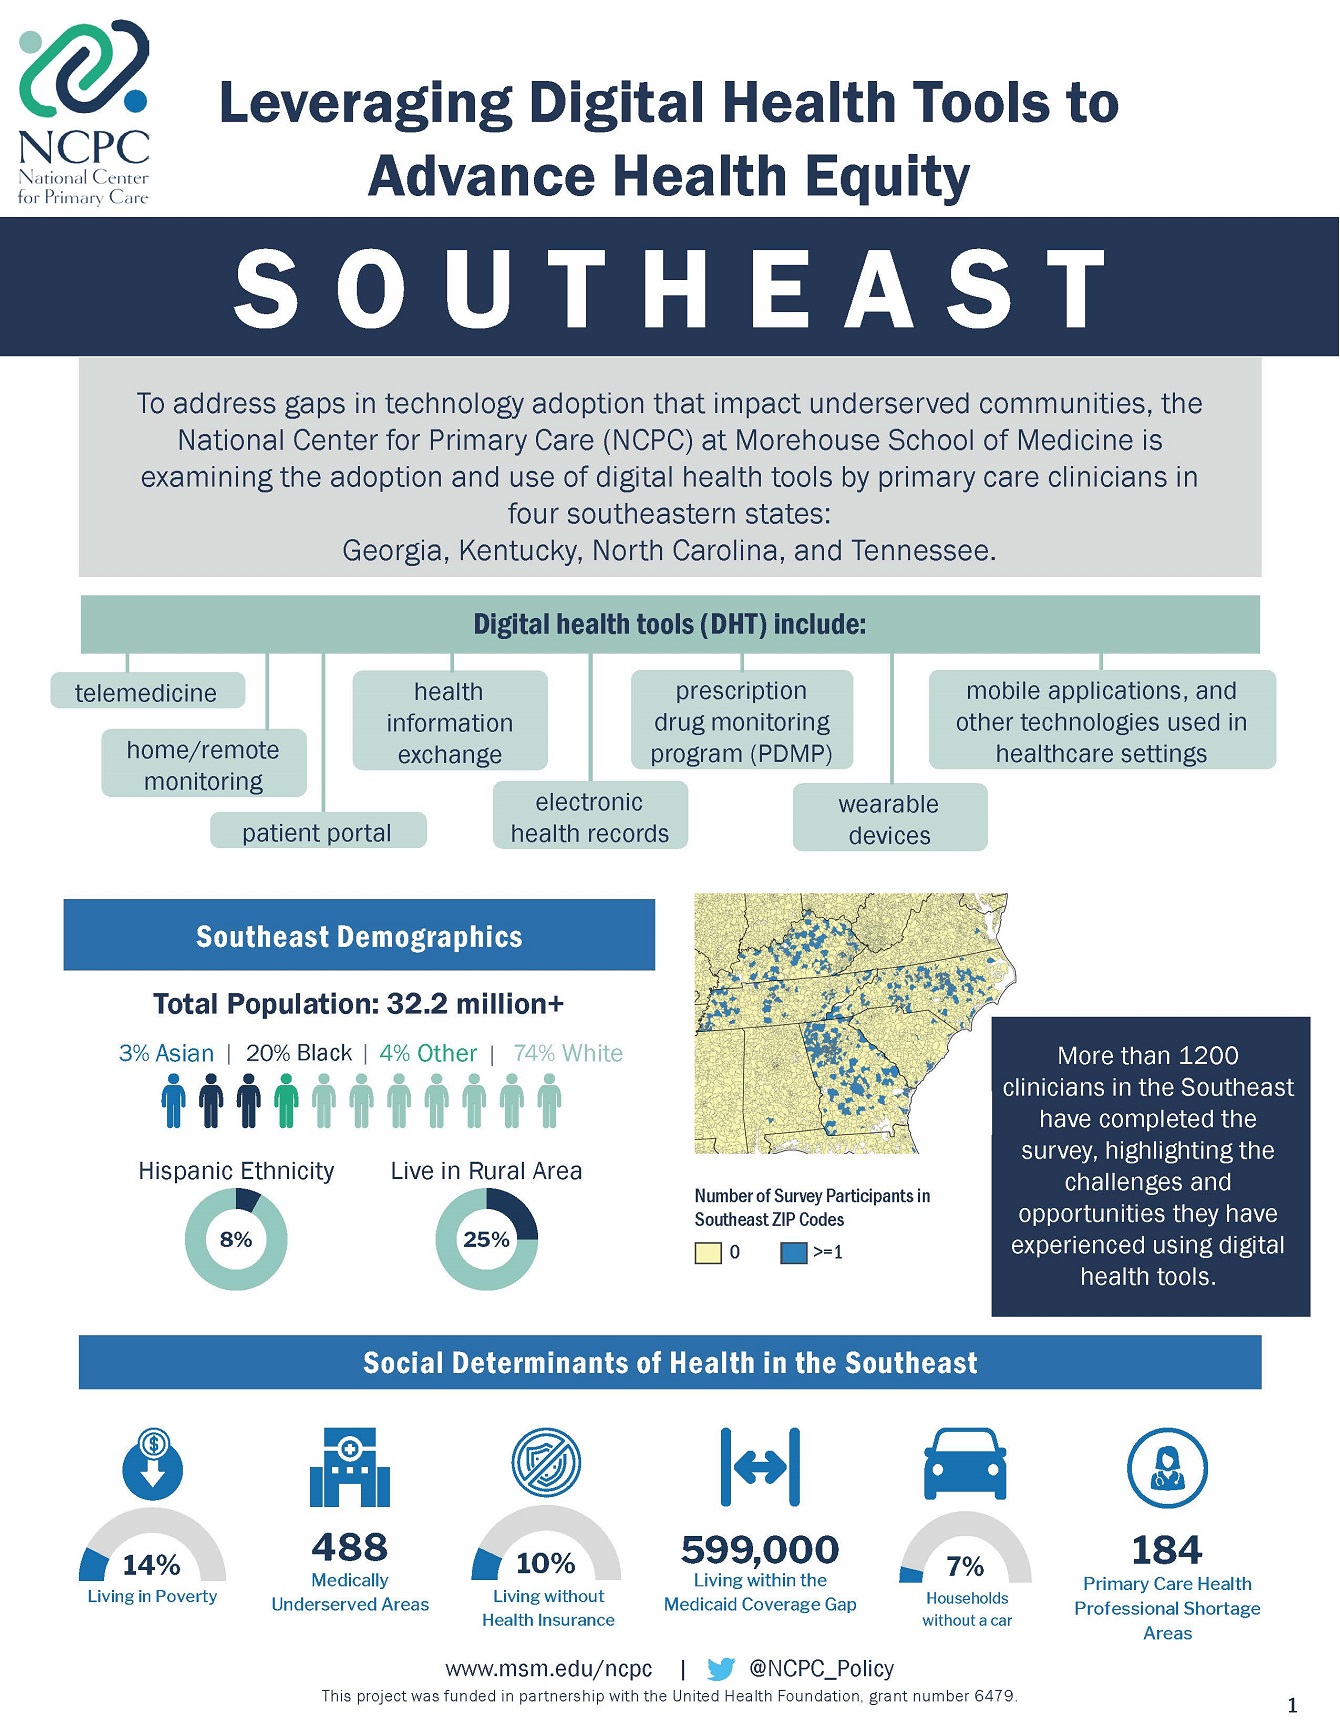 Southeast DHTS Brief